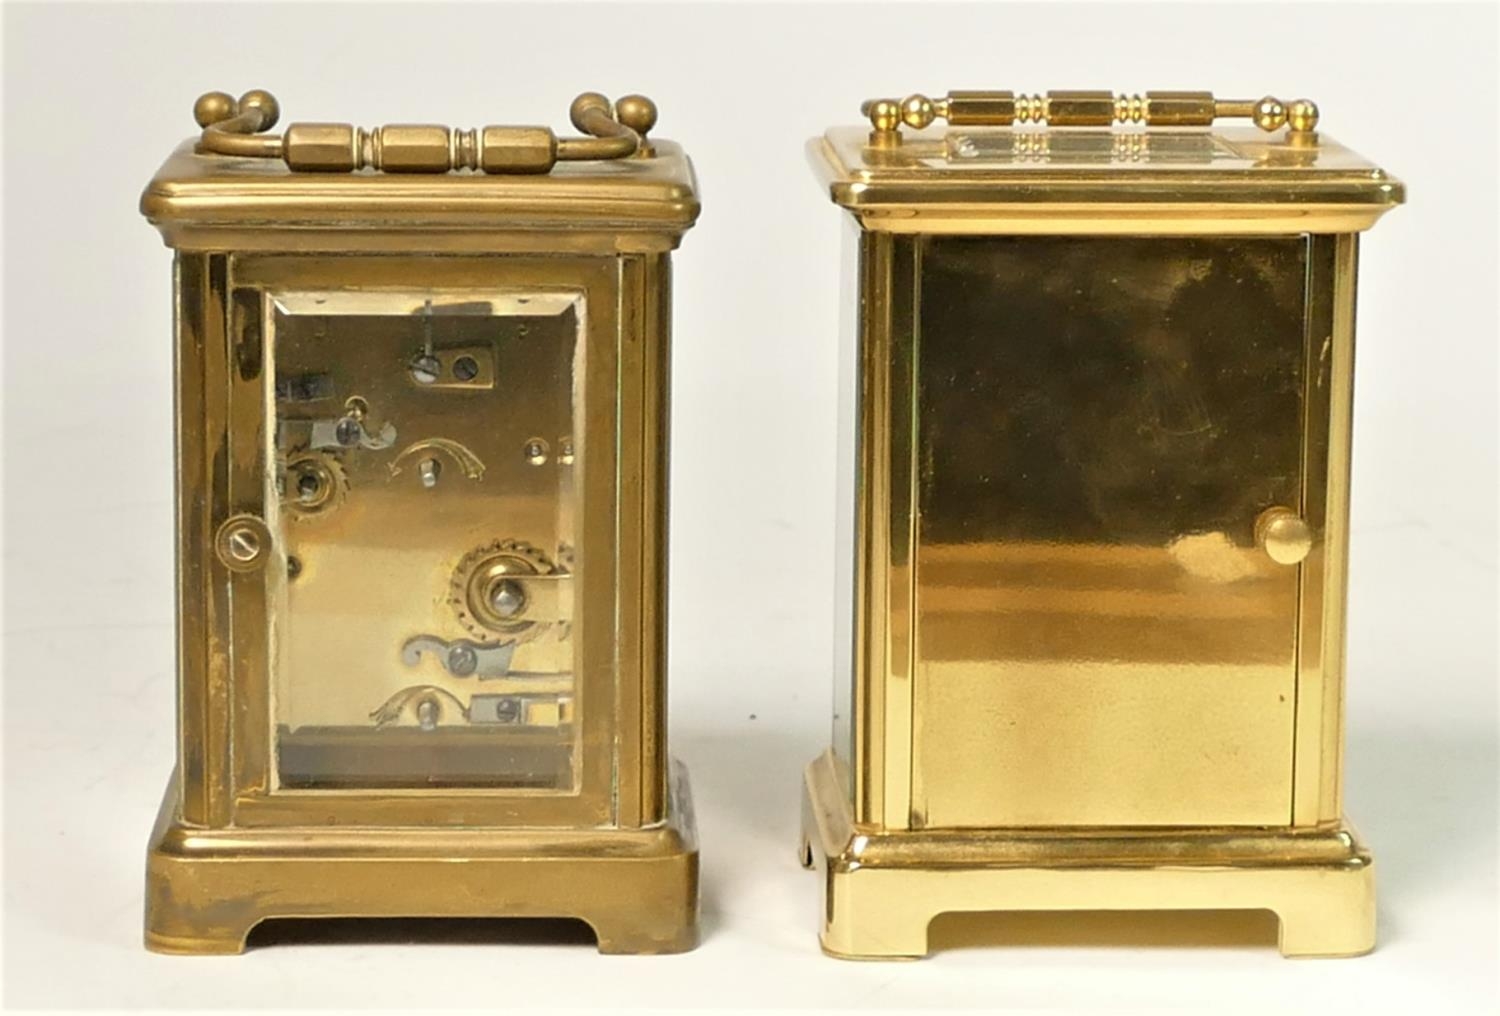 A Watches of Switzerland 8 day manual wind carriage clock 11cm, together with an unmarked manual - Image 3 of 4